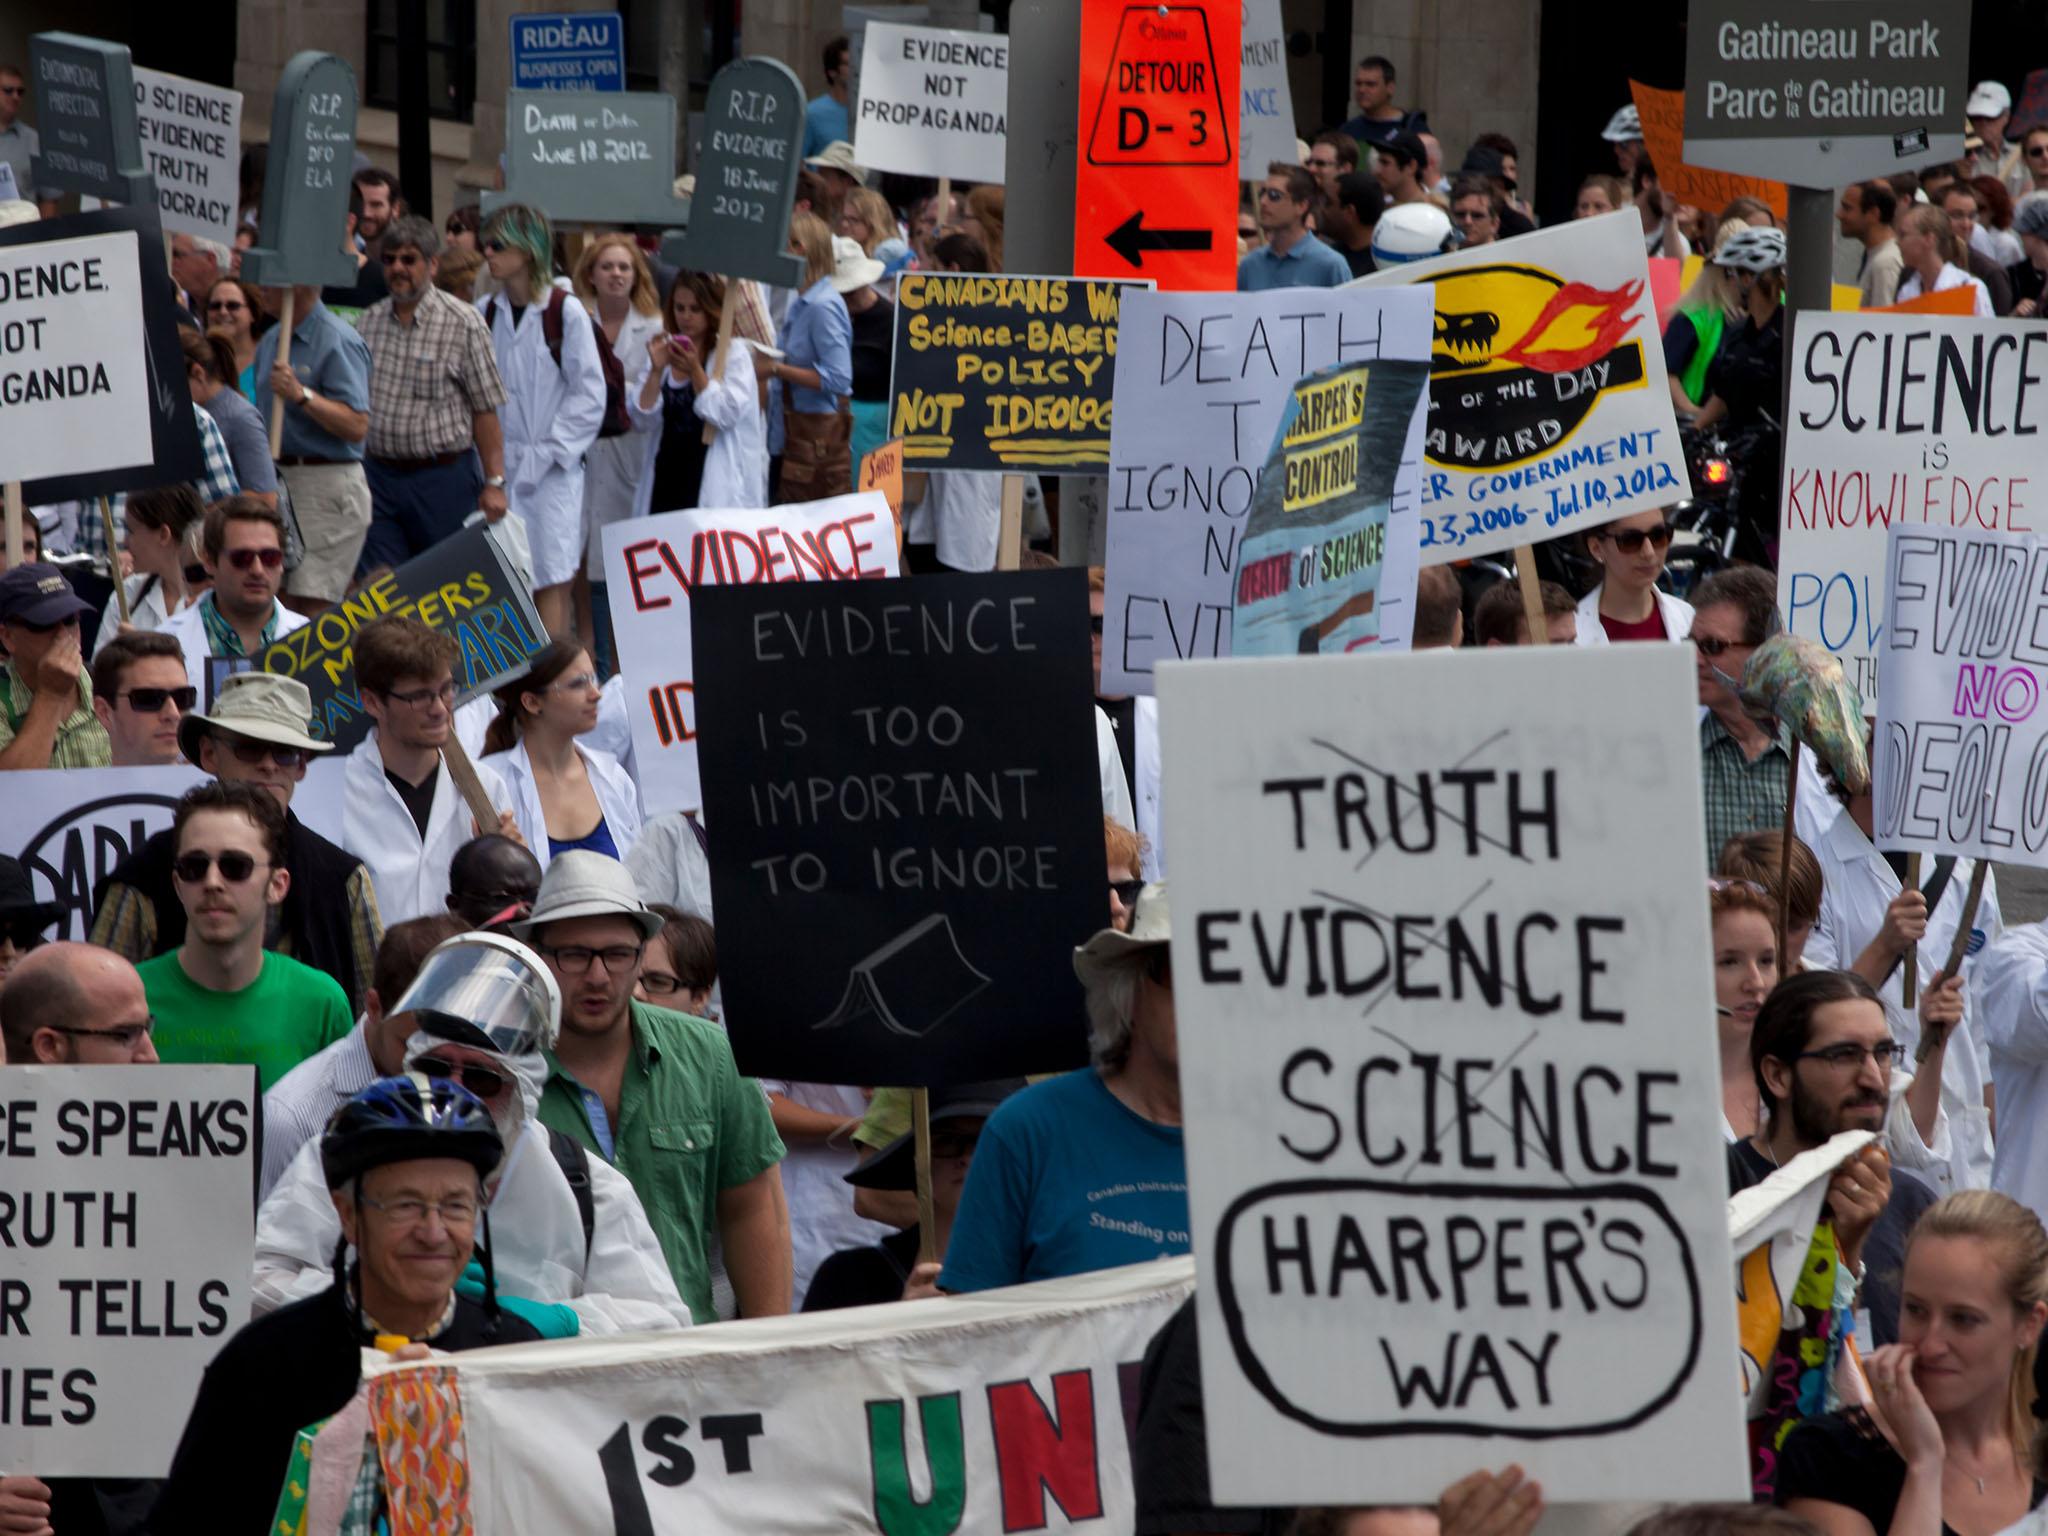 The effects of Harper’s clampdown on Canada’s scientific community can still be felt today